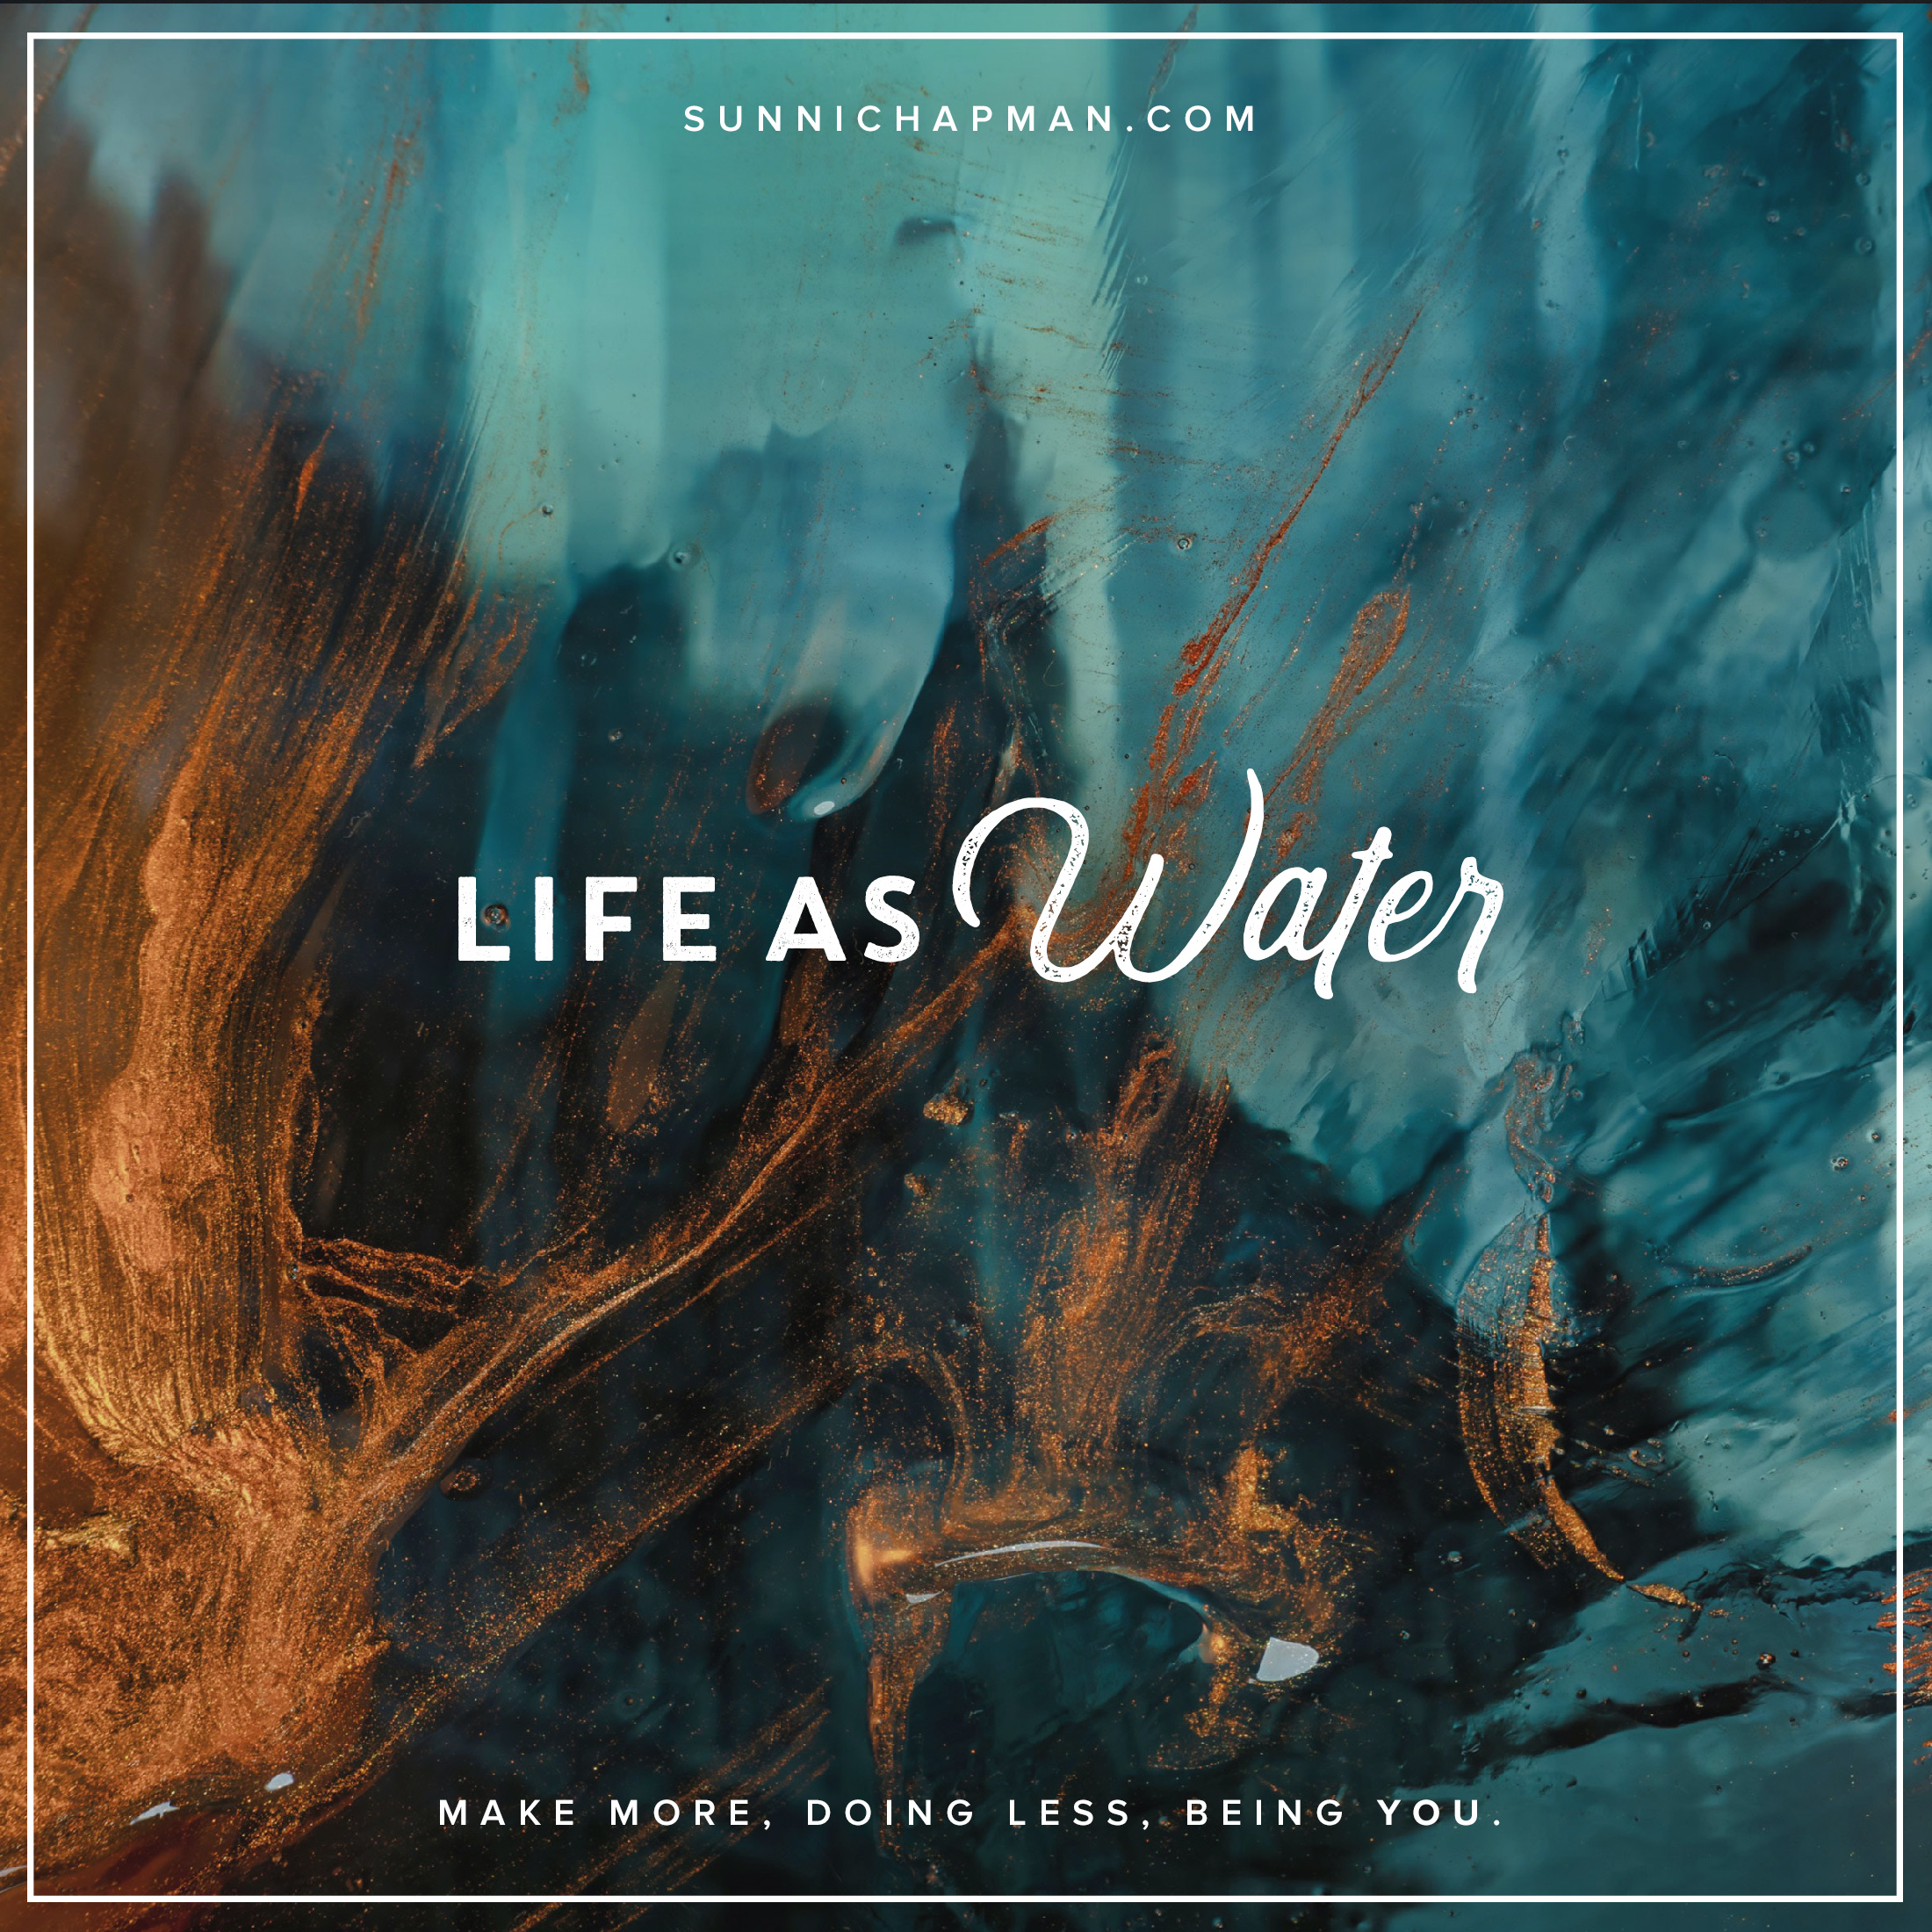 Artistic background with waves, and text over it that says Life As Water